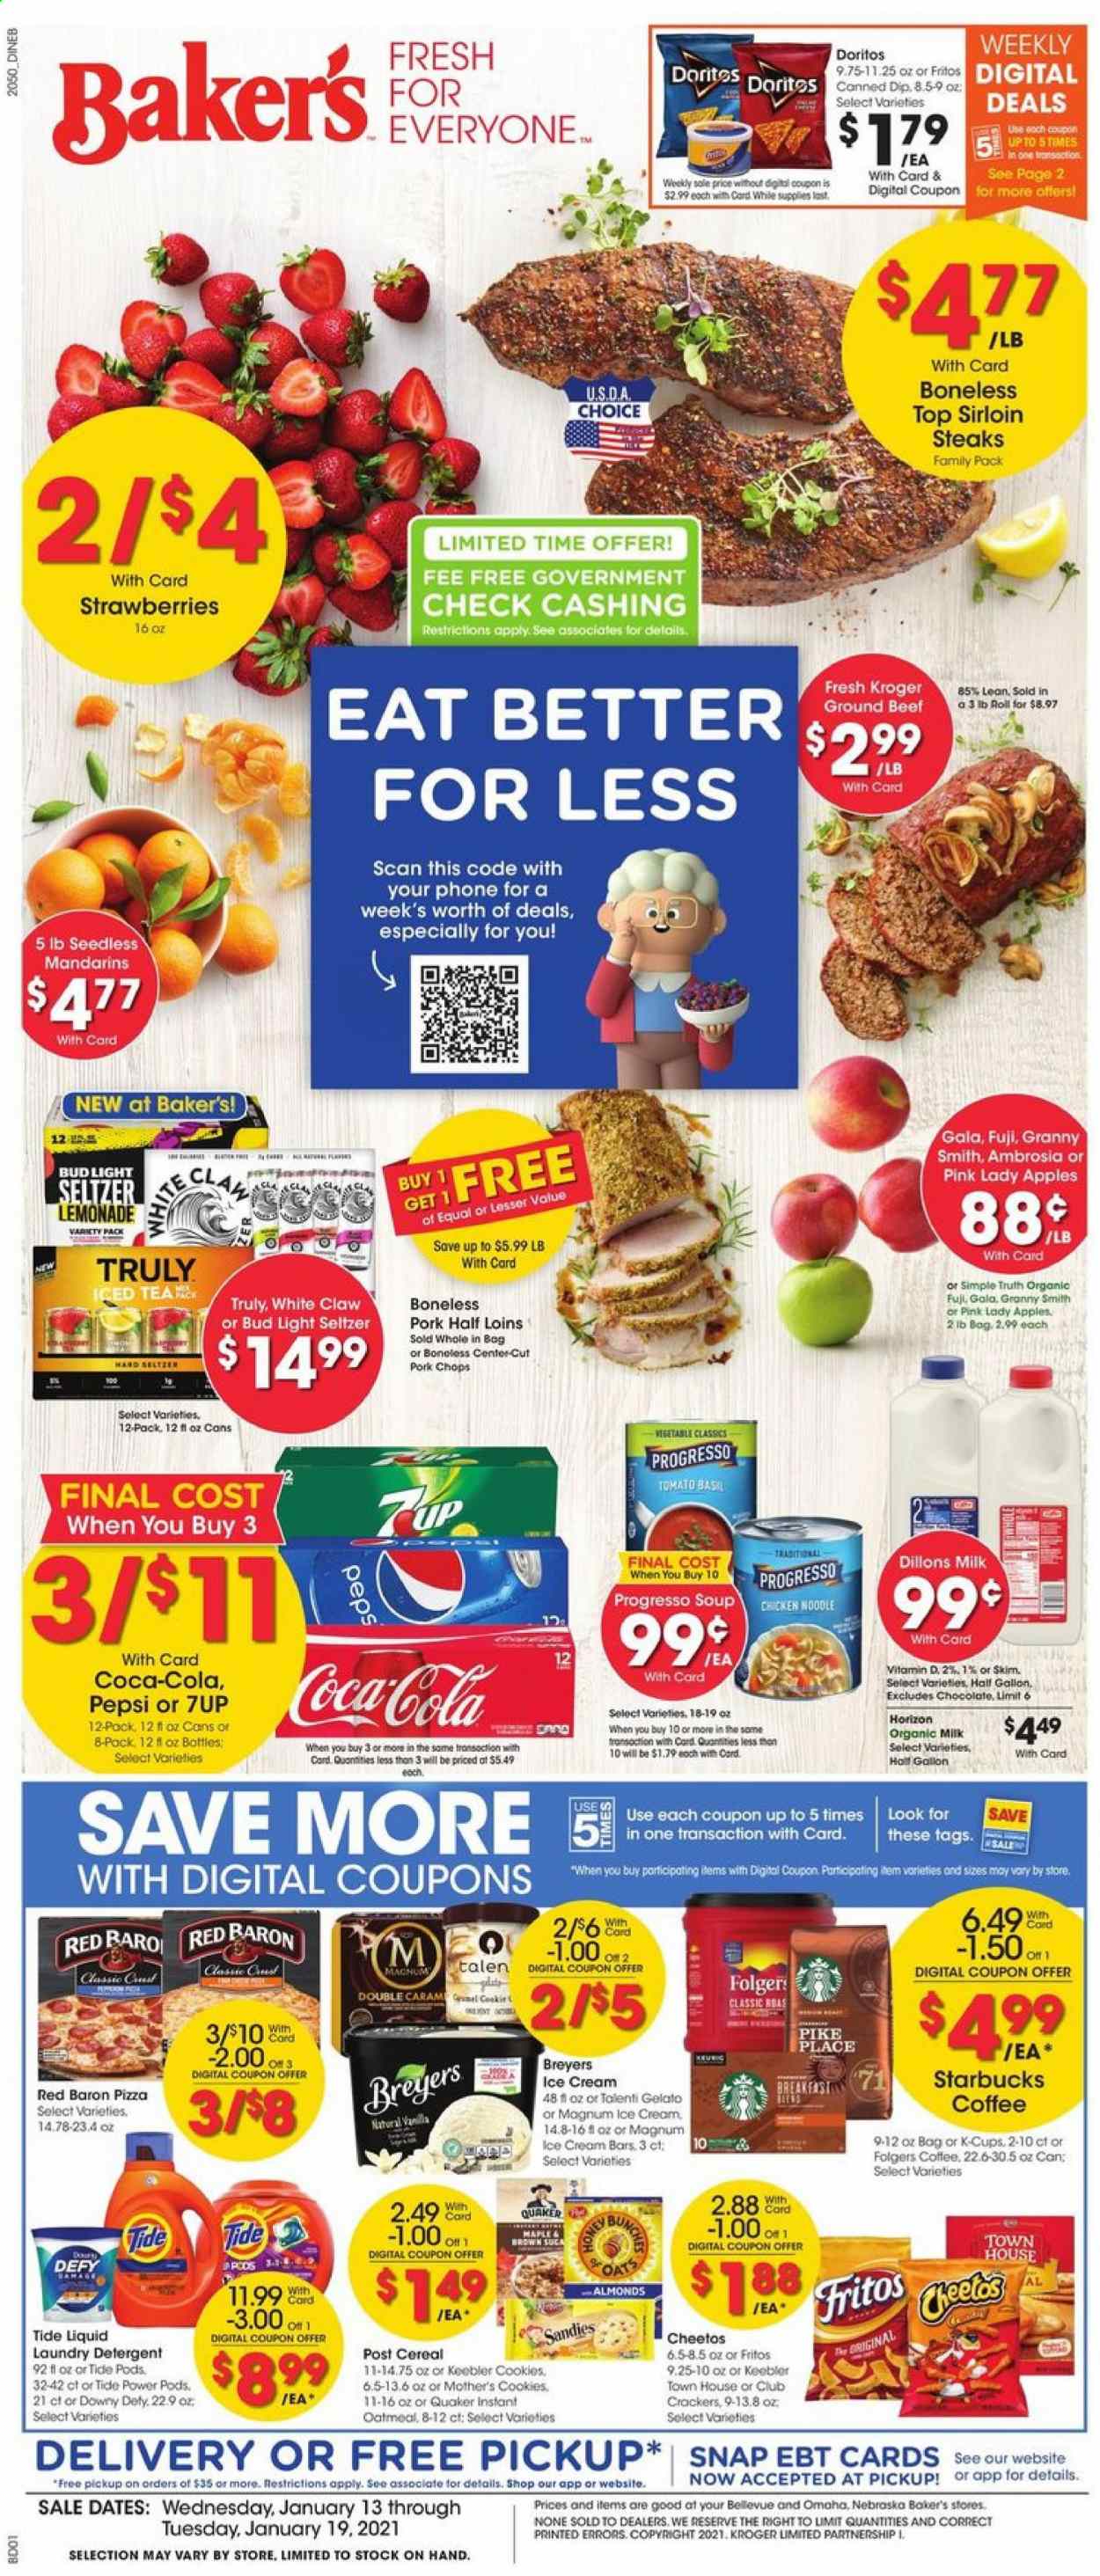 thumbnail - Baker's Flyer - 01/13/2021 - 01/19/2021 - Sales products - apples, pizza, Quaker, Progresso, organic milk, dip, ice cream, ice cream bars, Talenti Gelato, gelato, strawberries, Red Baron, cookies, chocolate, crackers, Keebler, Doritos, Cheetos, oatmeal, oats, mandarines, cereals, Fritos, noodles, esponja, almonds, Coca-Cola, lemonade, Pepsi, 7UP, seltzer water, coffee, Starbucks, Folgers, coffee capsules, K-Cups, breakfast blend, White Claw, TRULY, beer, Bud Light, beef meat, ground beef, steak, sirloin steak, pork chops, pork meat, detergent, Tide, laundry detergent, Bakers, gallon. Page 1.